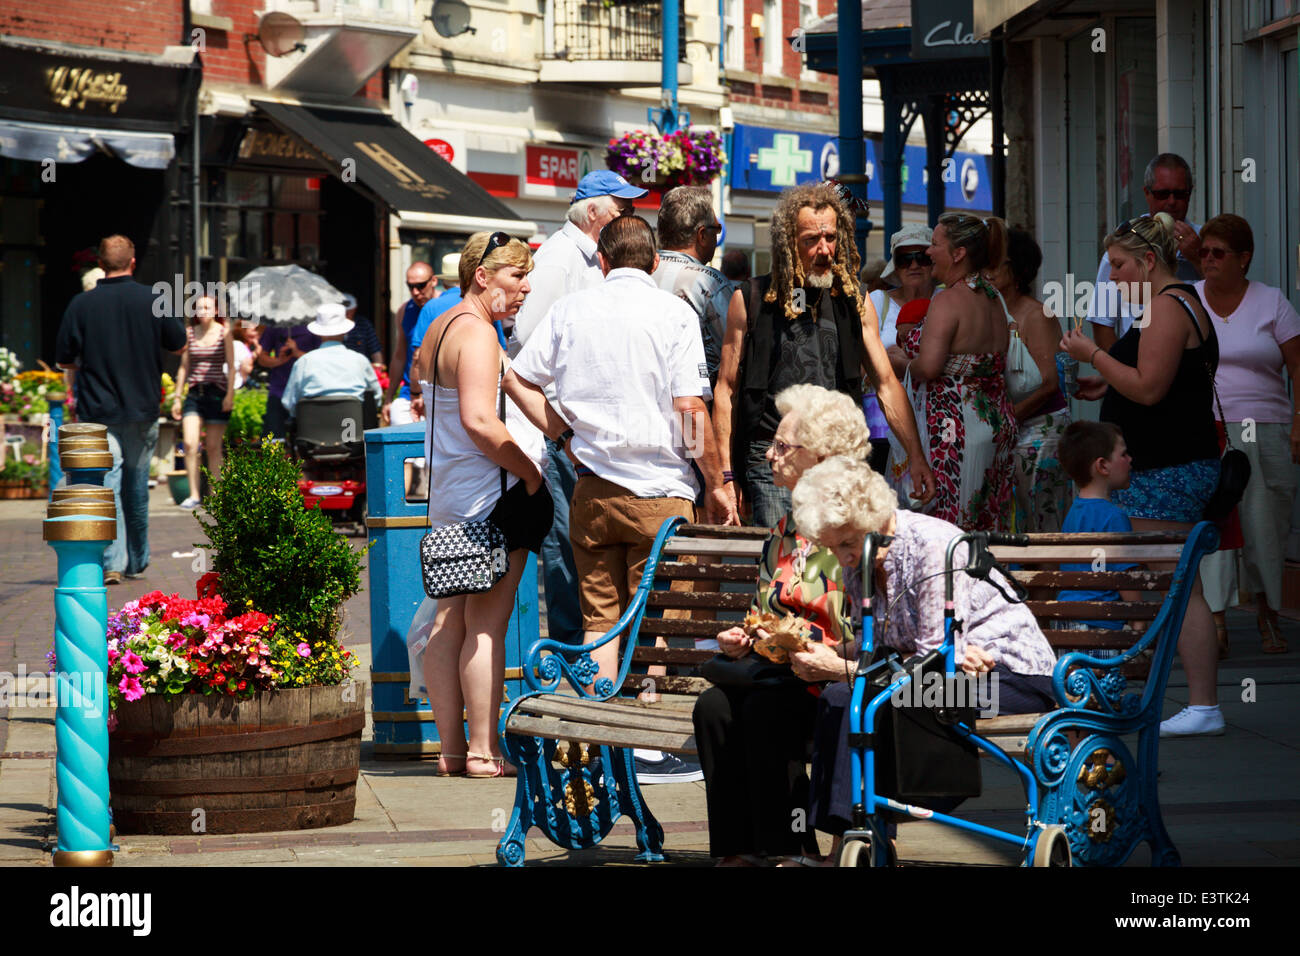 Shoppers and sitters in Porthcawl town Stock Photo